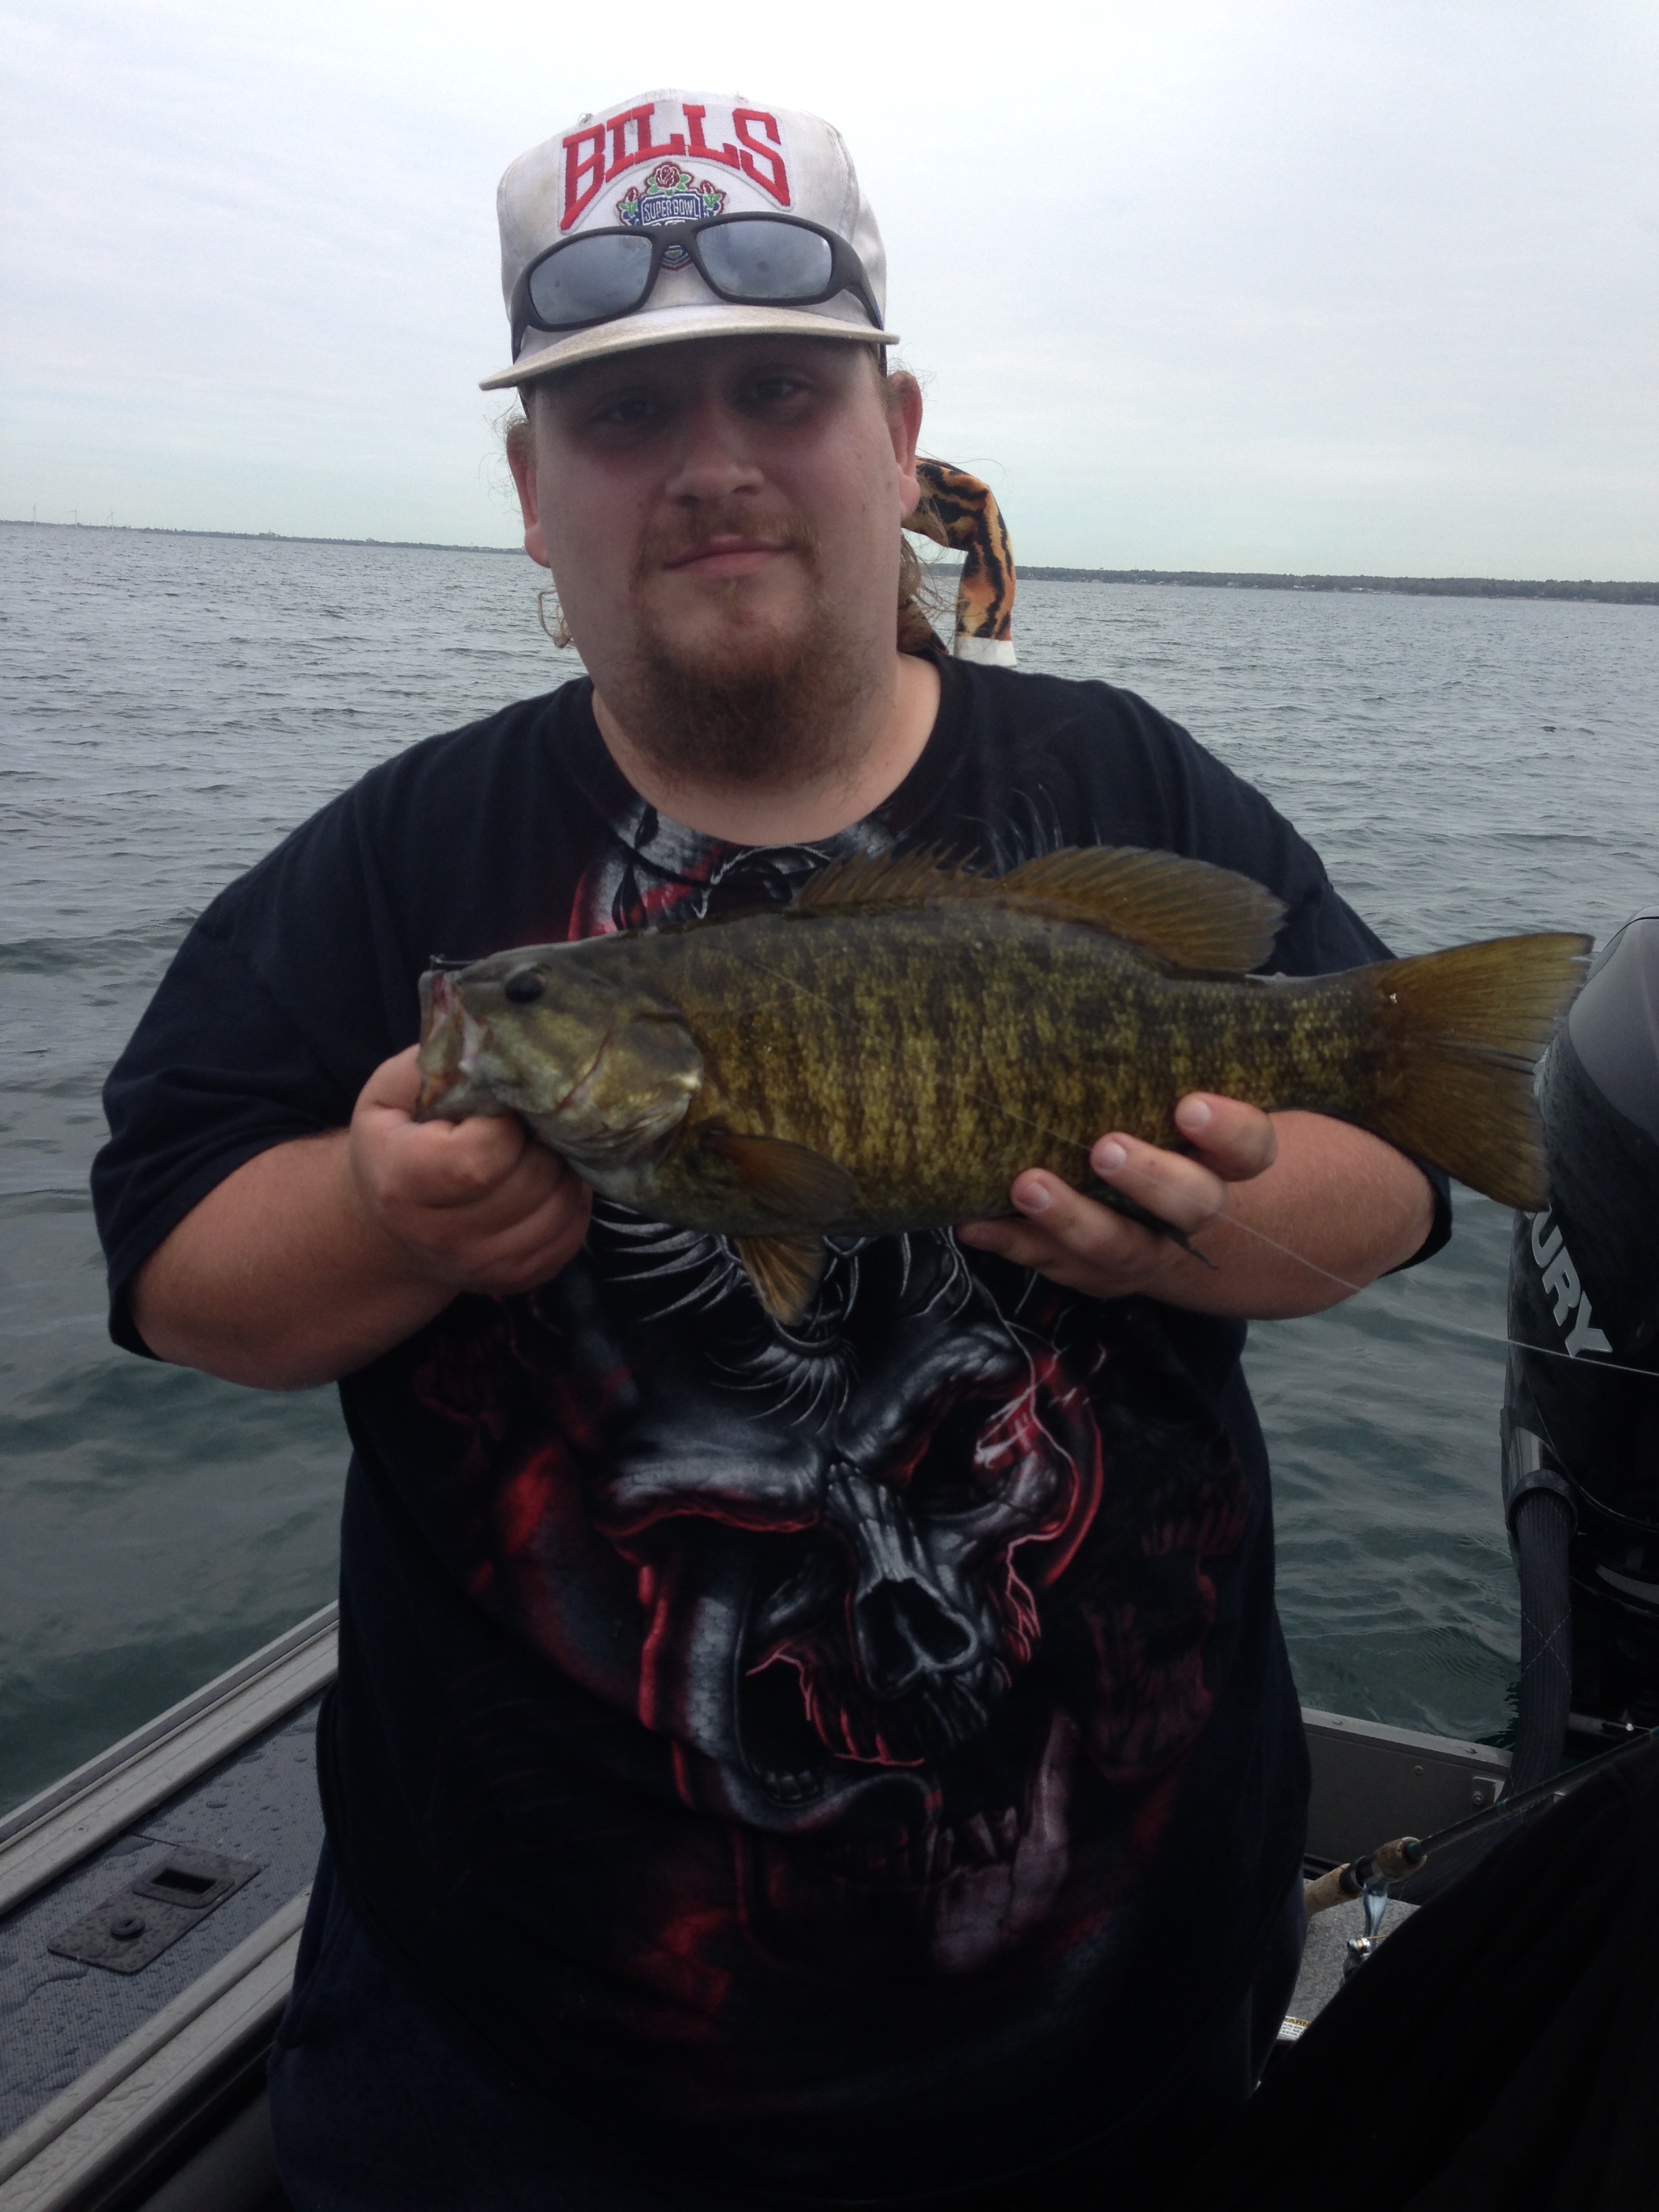 Some pictures from October fishing on Lake Erie near